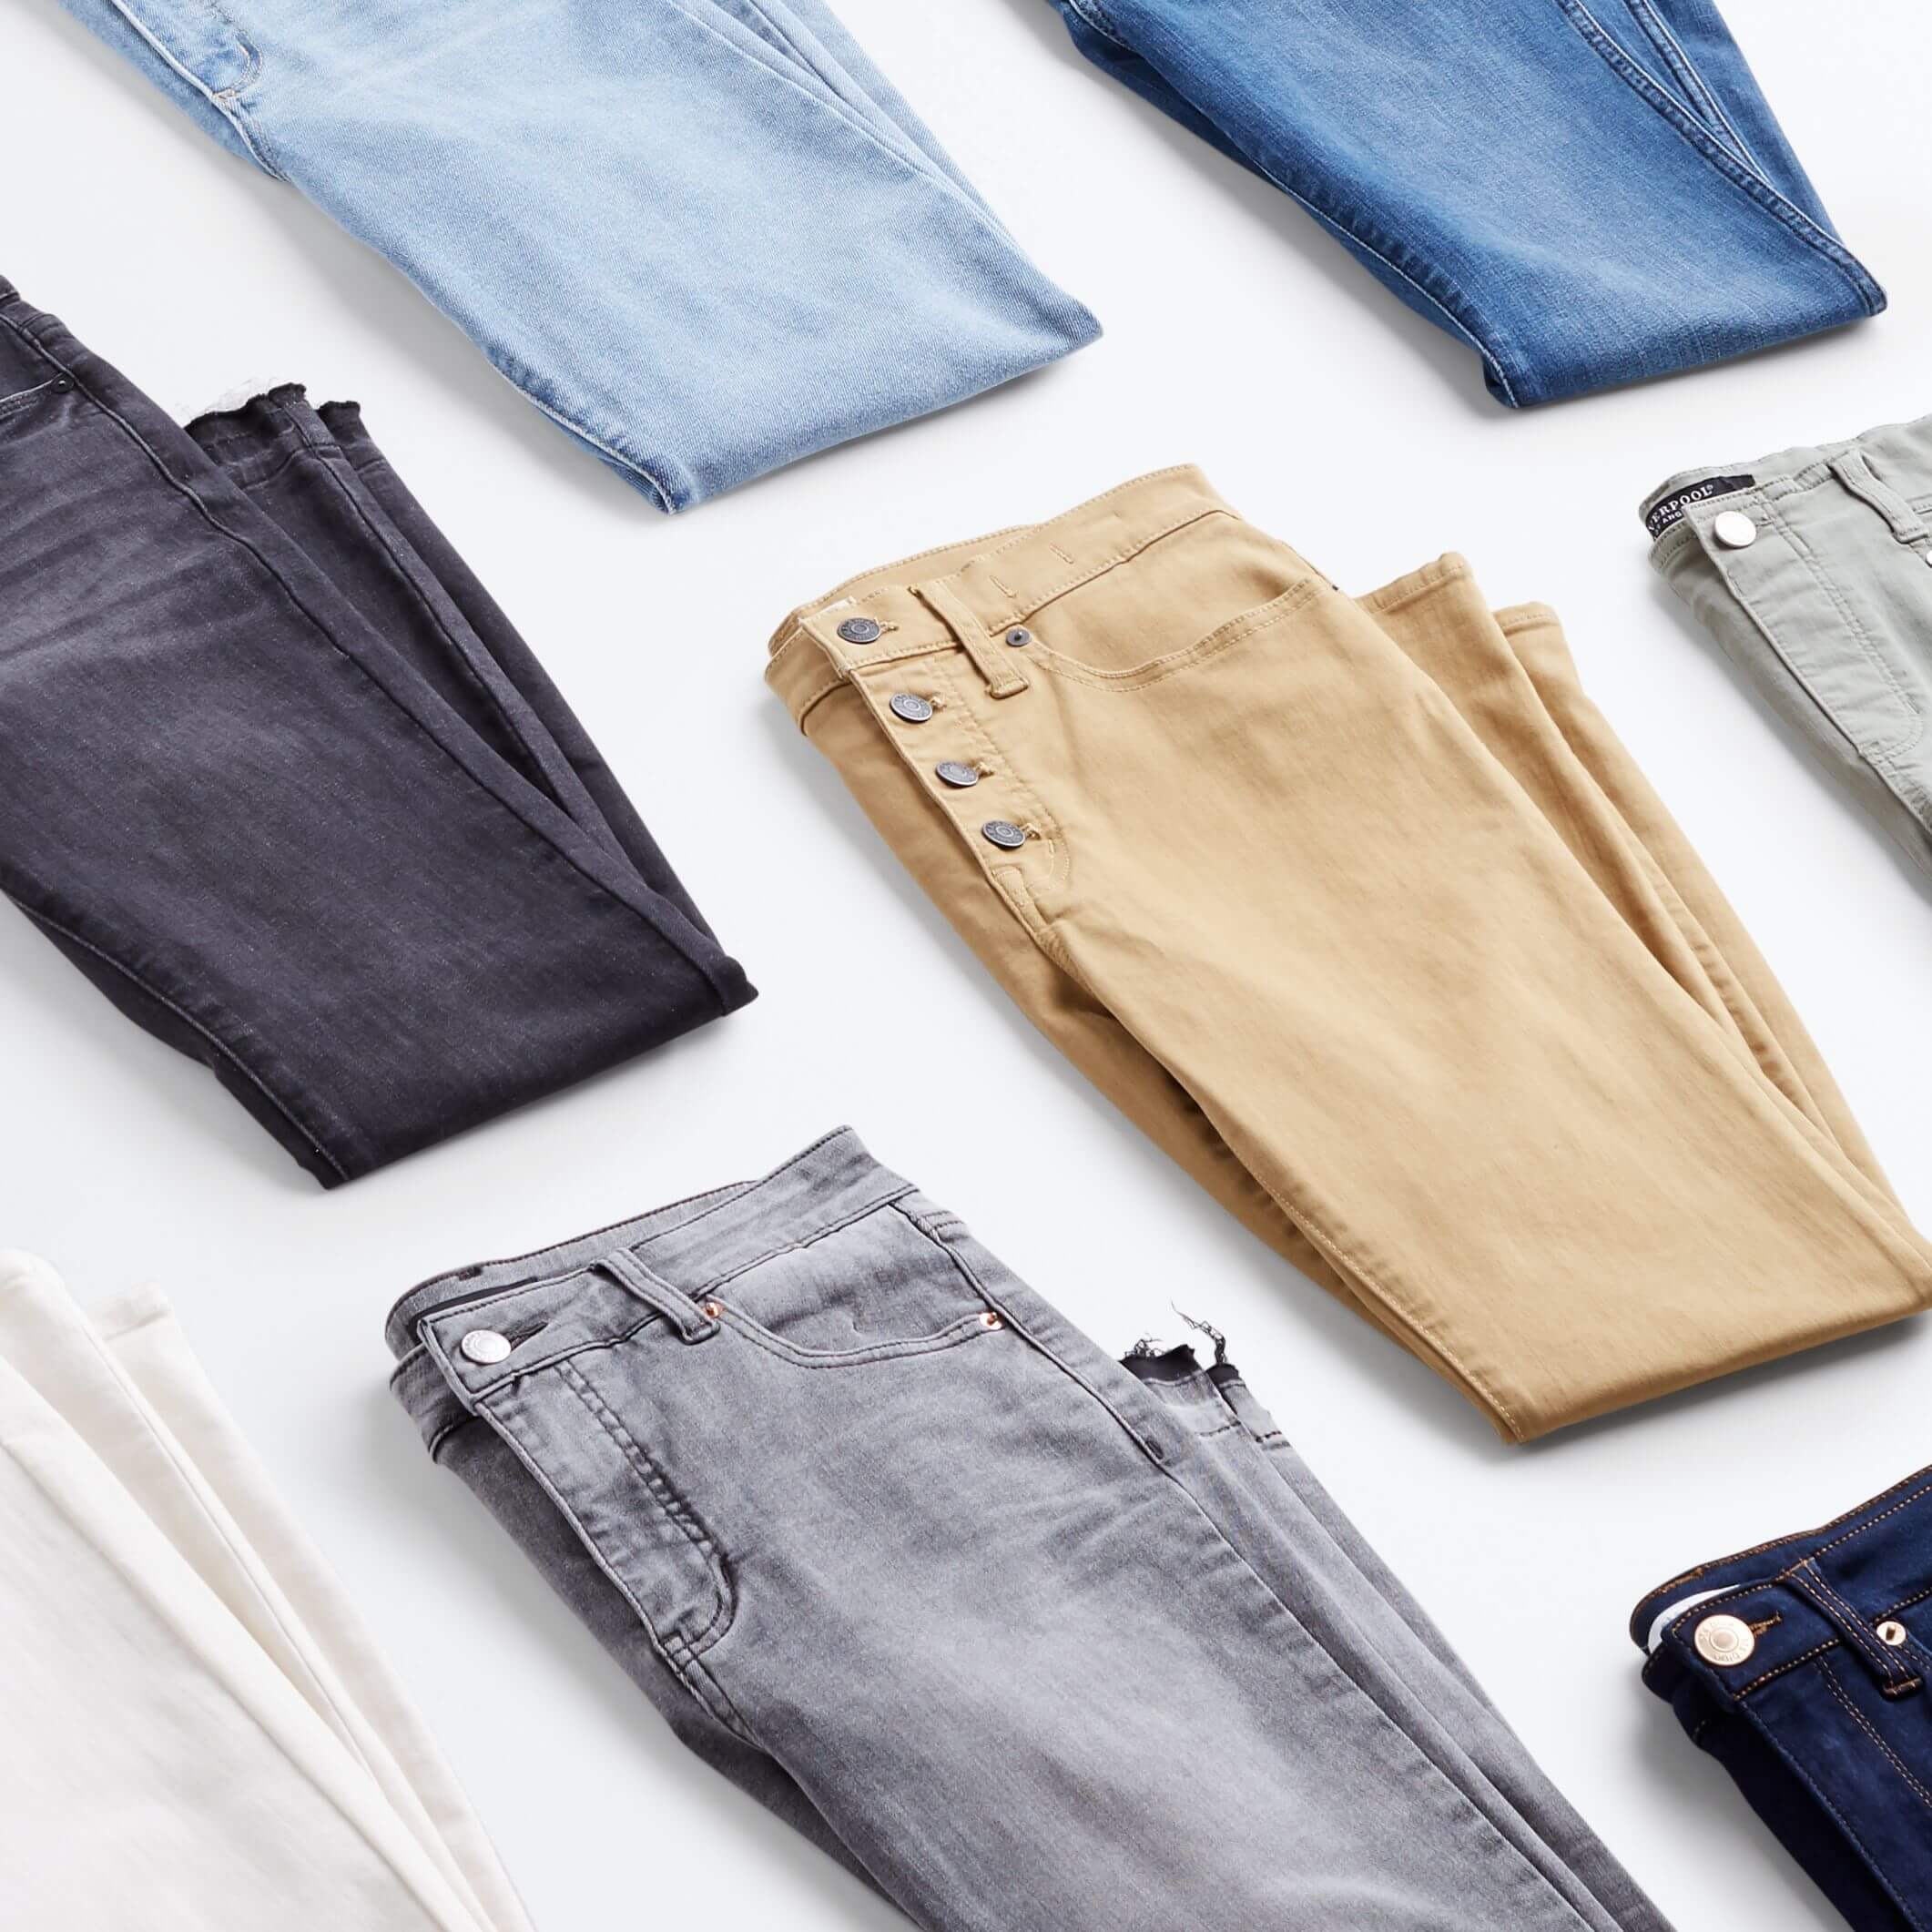 How to Shrink Jeans Guide, Personal Styling